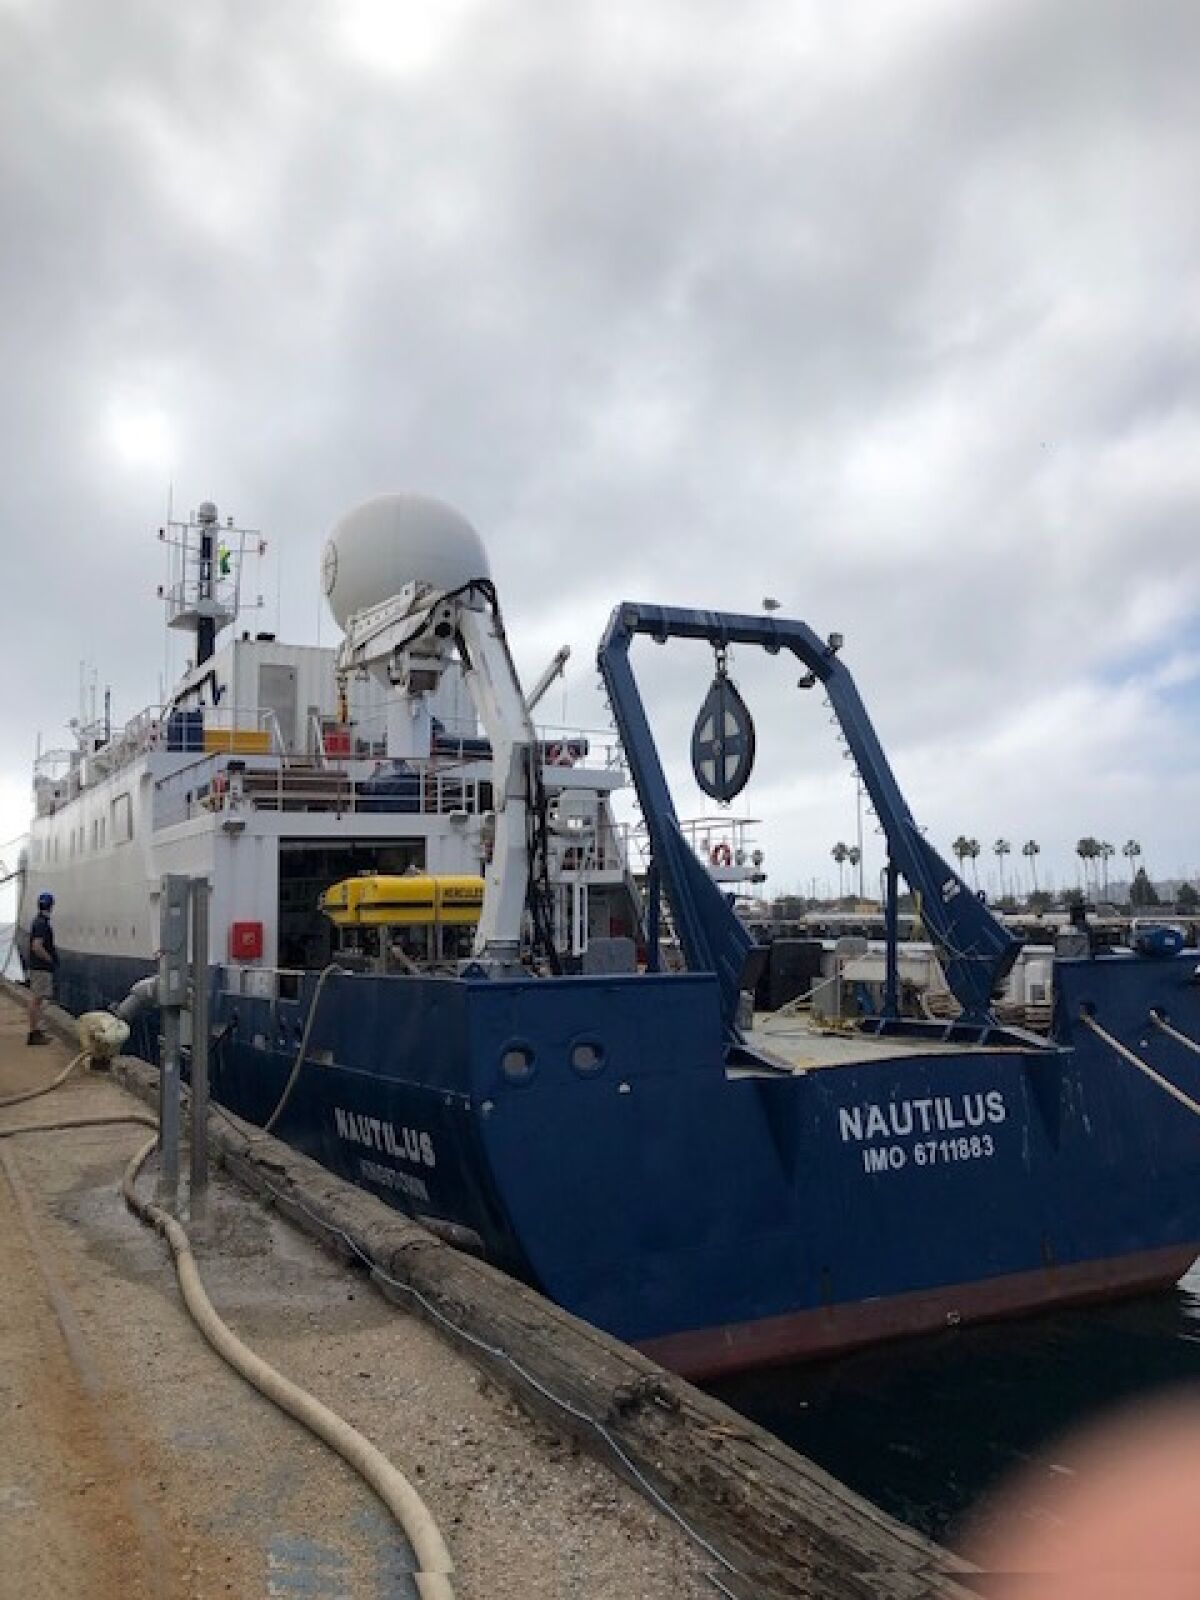 The research vessel Nautilus carried a Scripps Institution of Oceanography expedition Oct. 27 to Nov. 6.